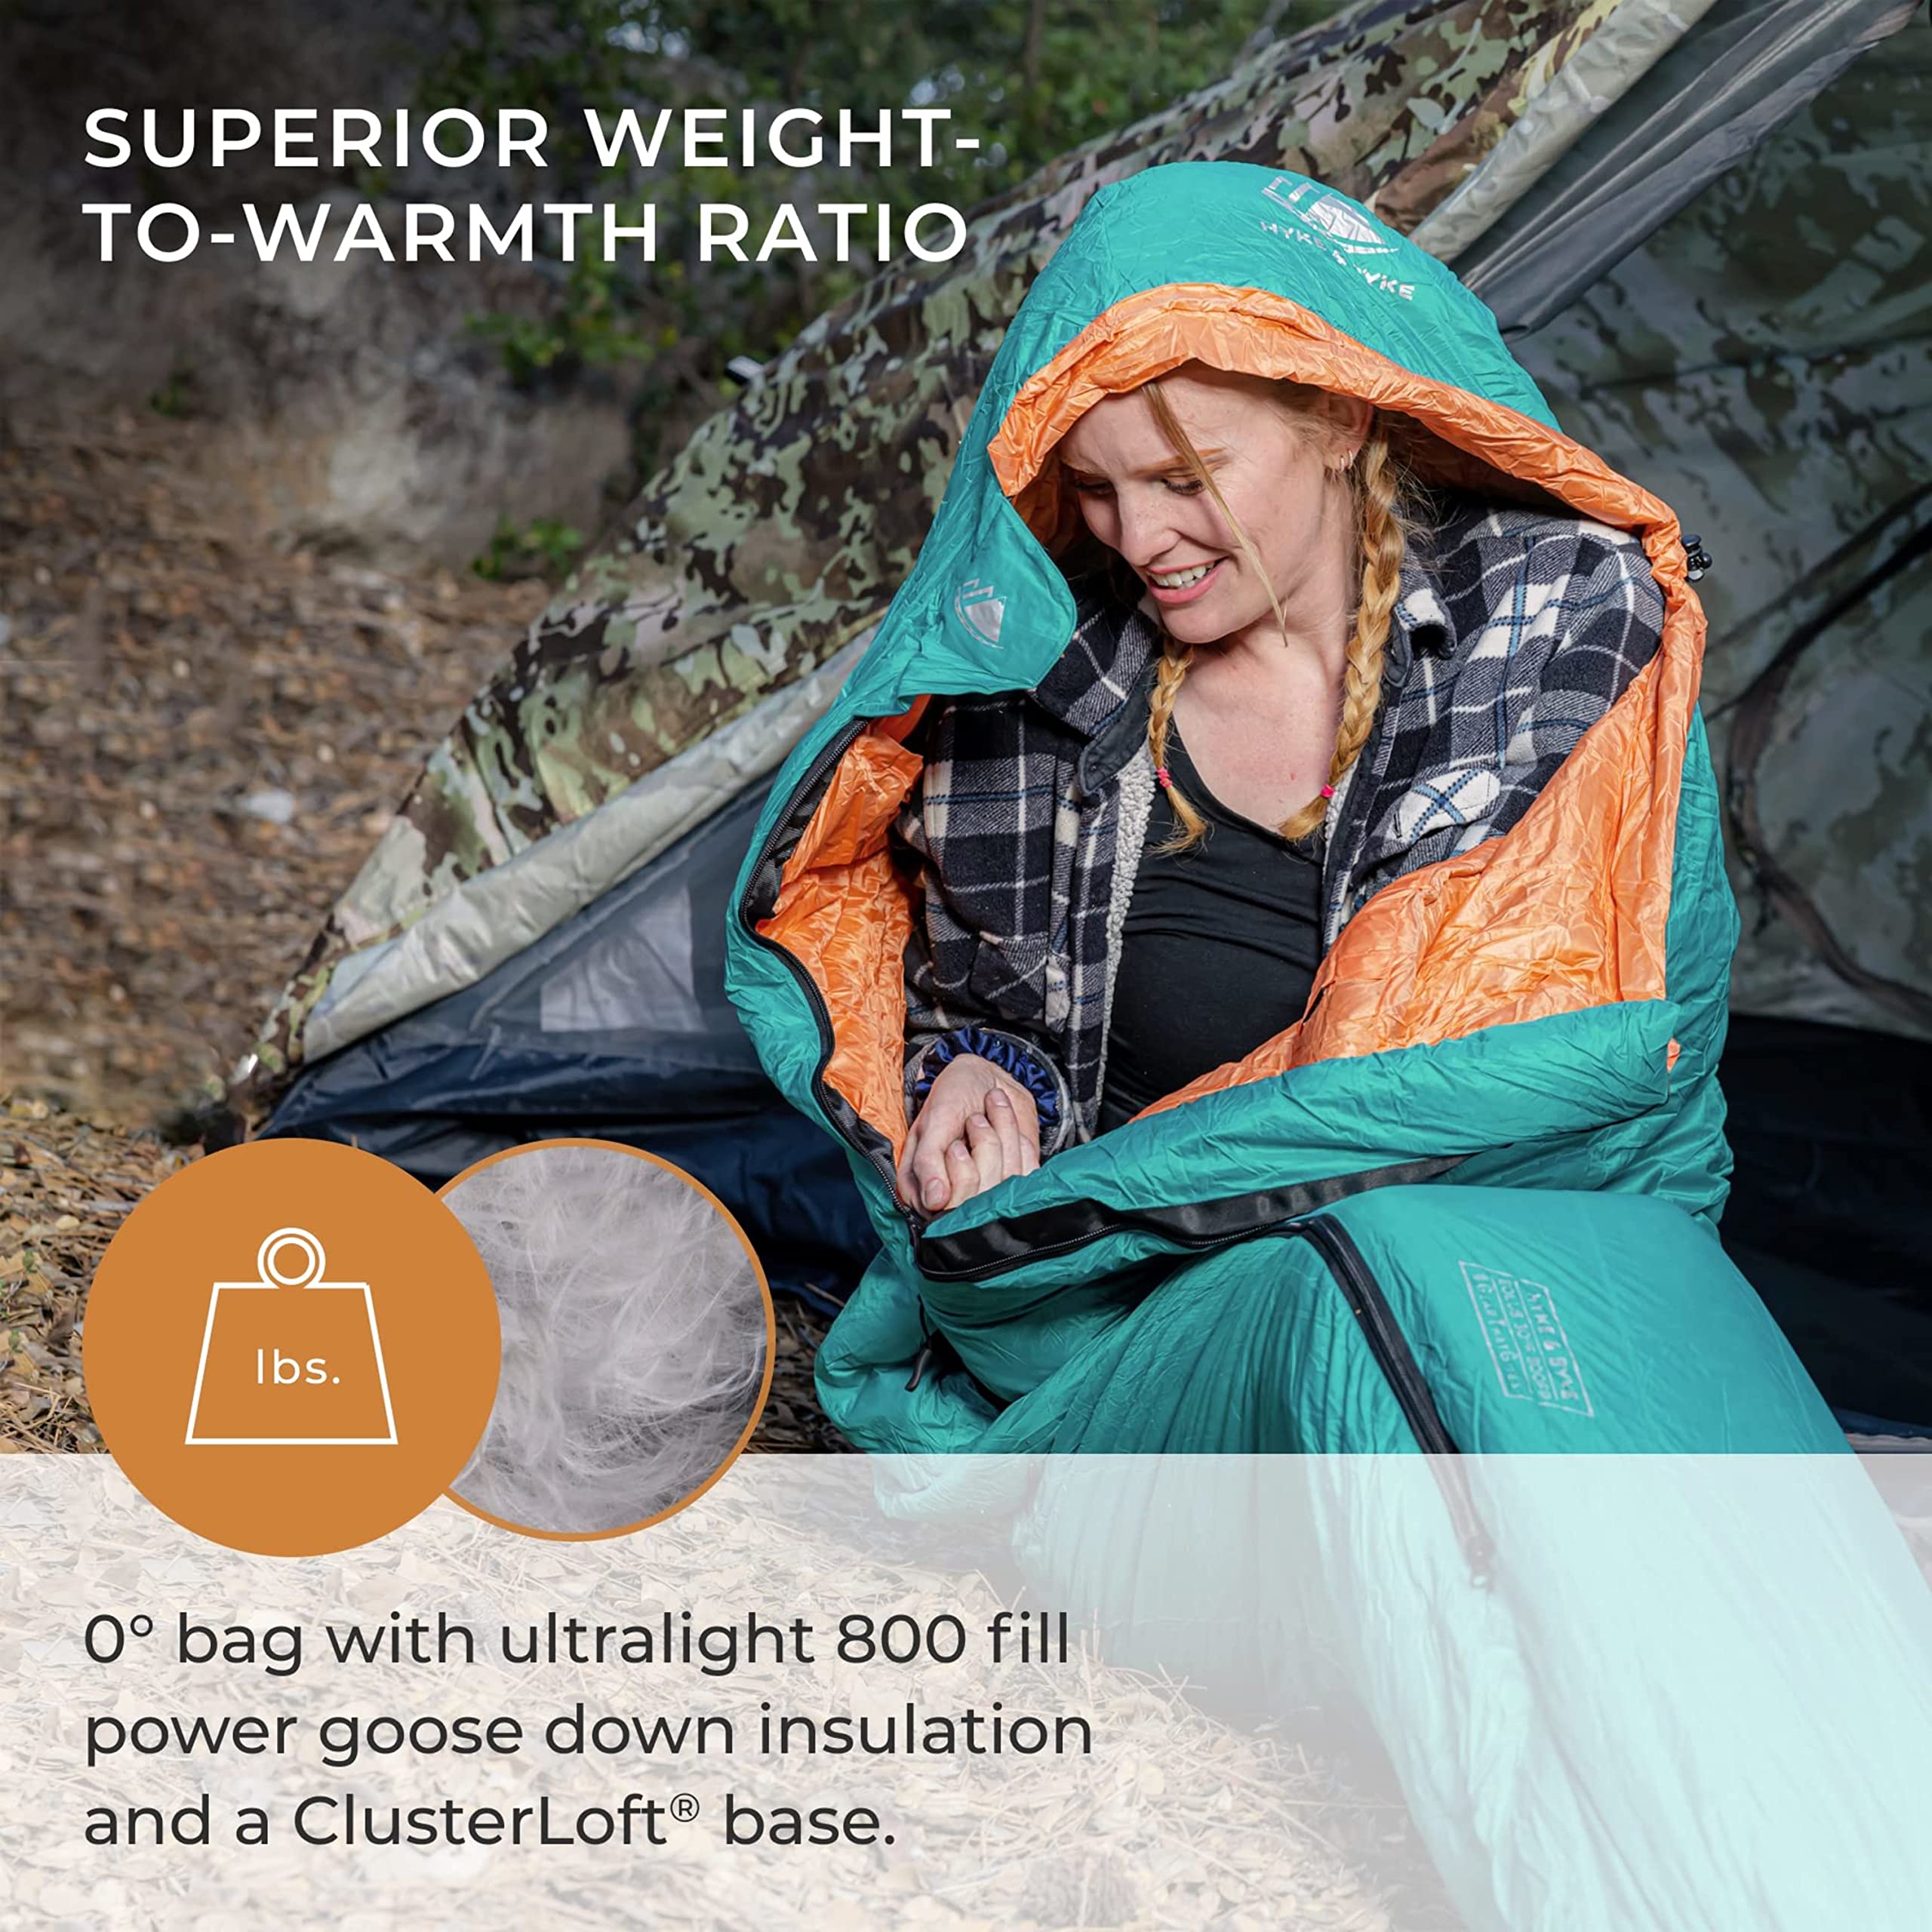 The 8 Best Ultralight Sleeping Bags | Curated.com